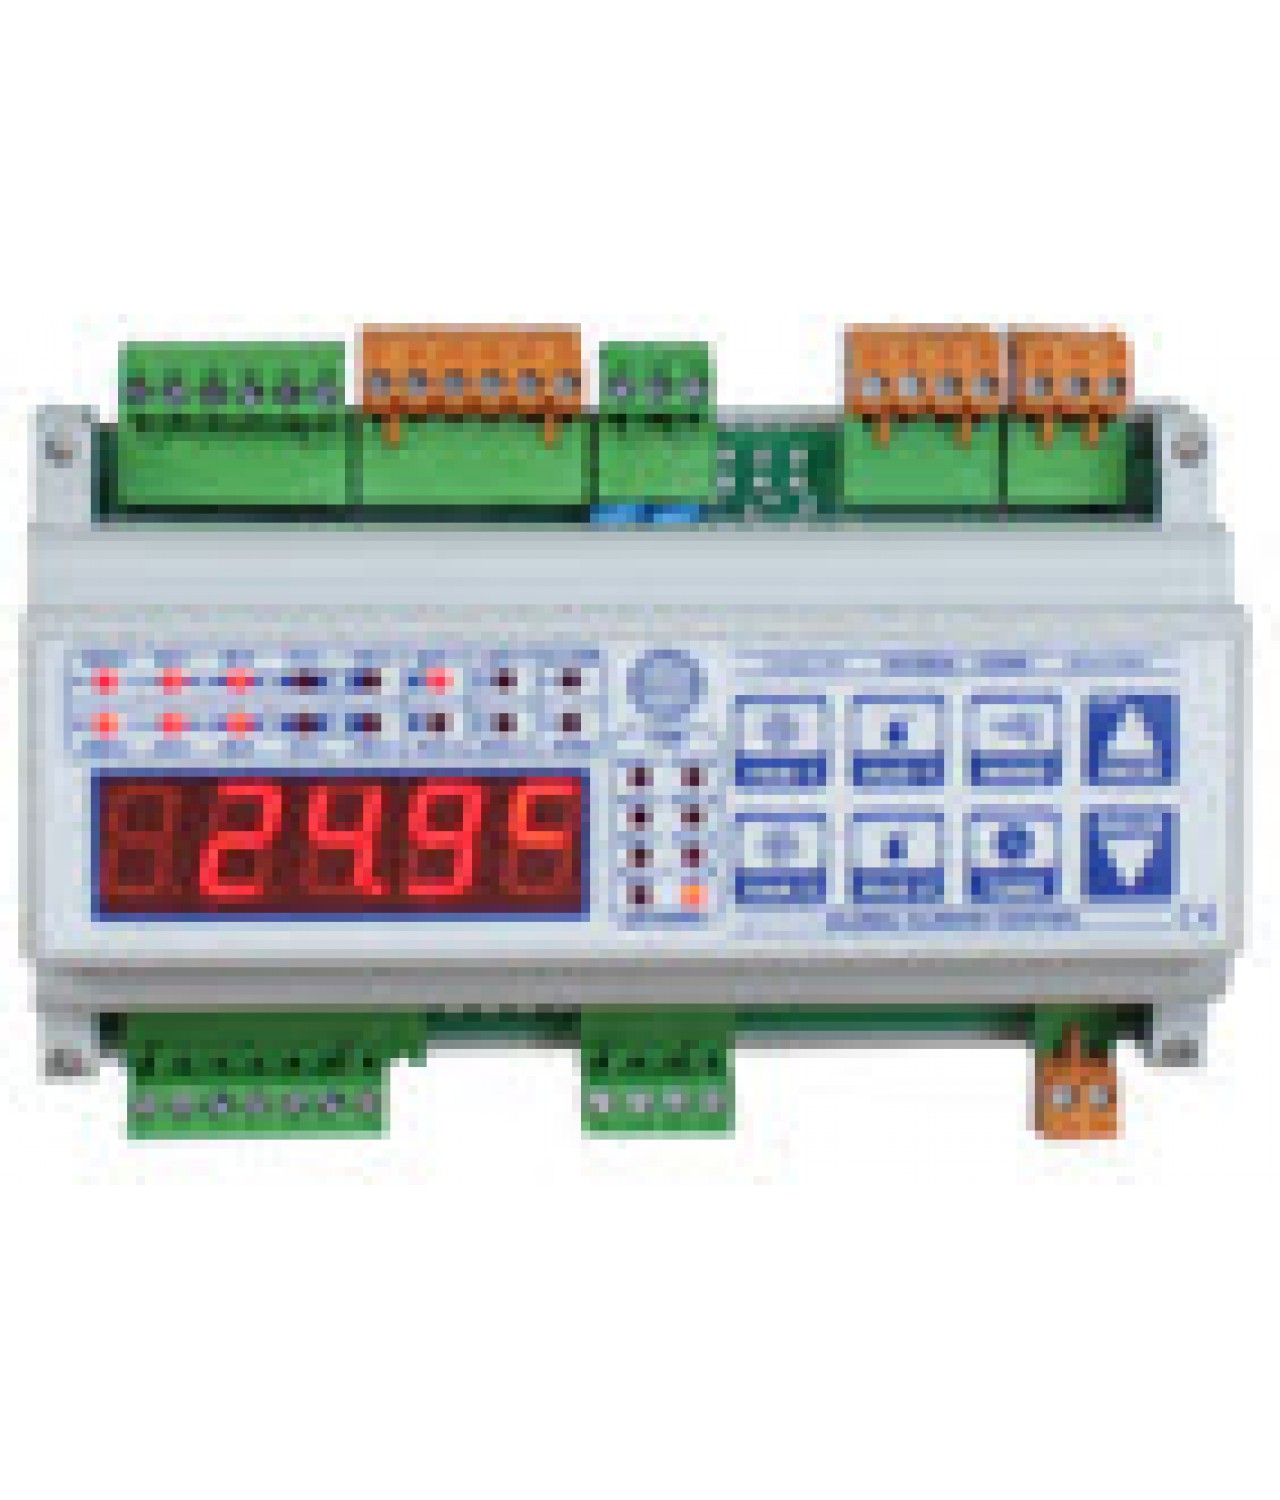 Control panel Global - speed controller for SUPER POLAR HVLS ceiling fans - to be ordered separately